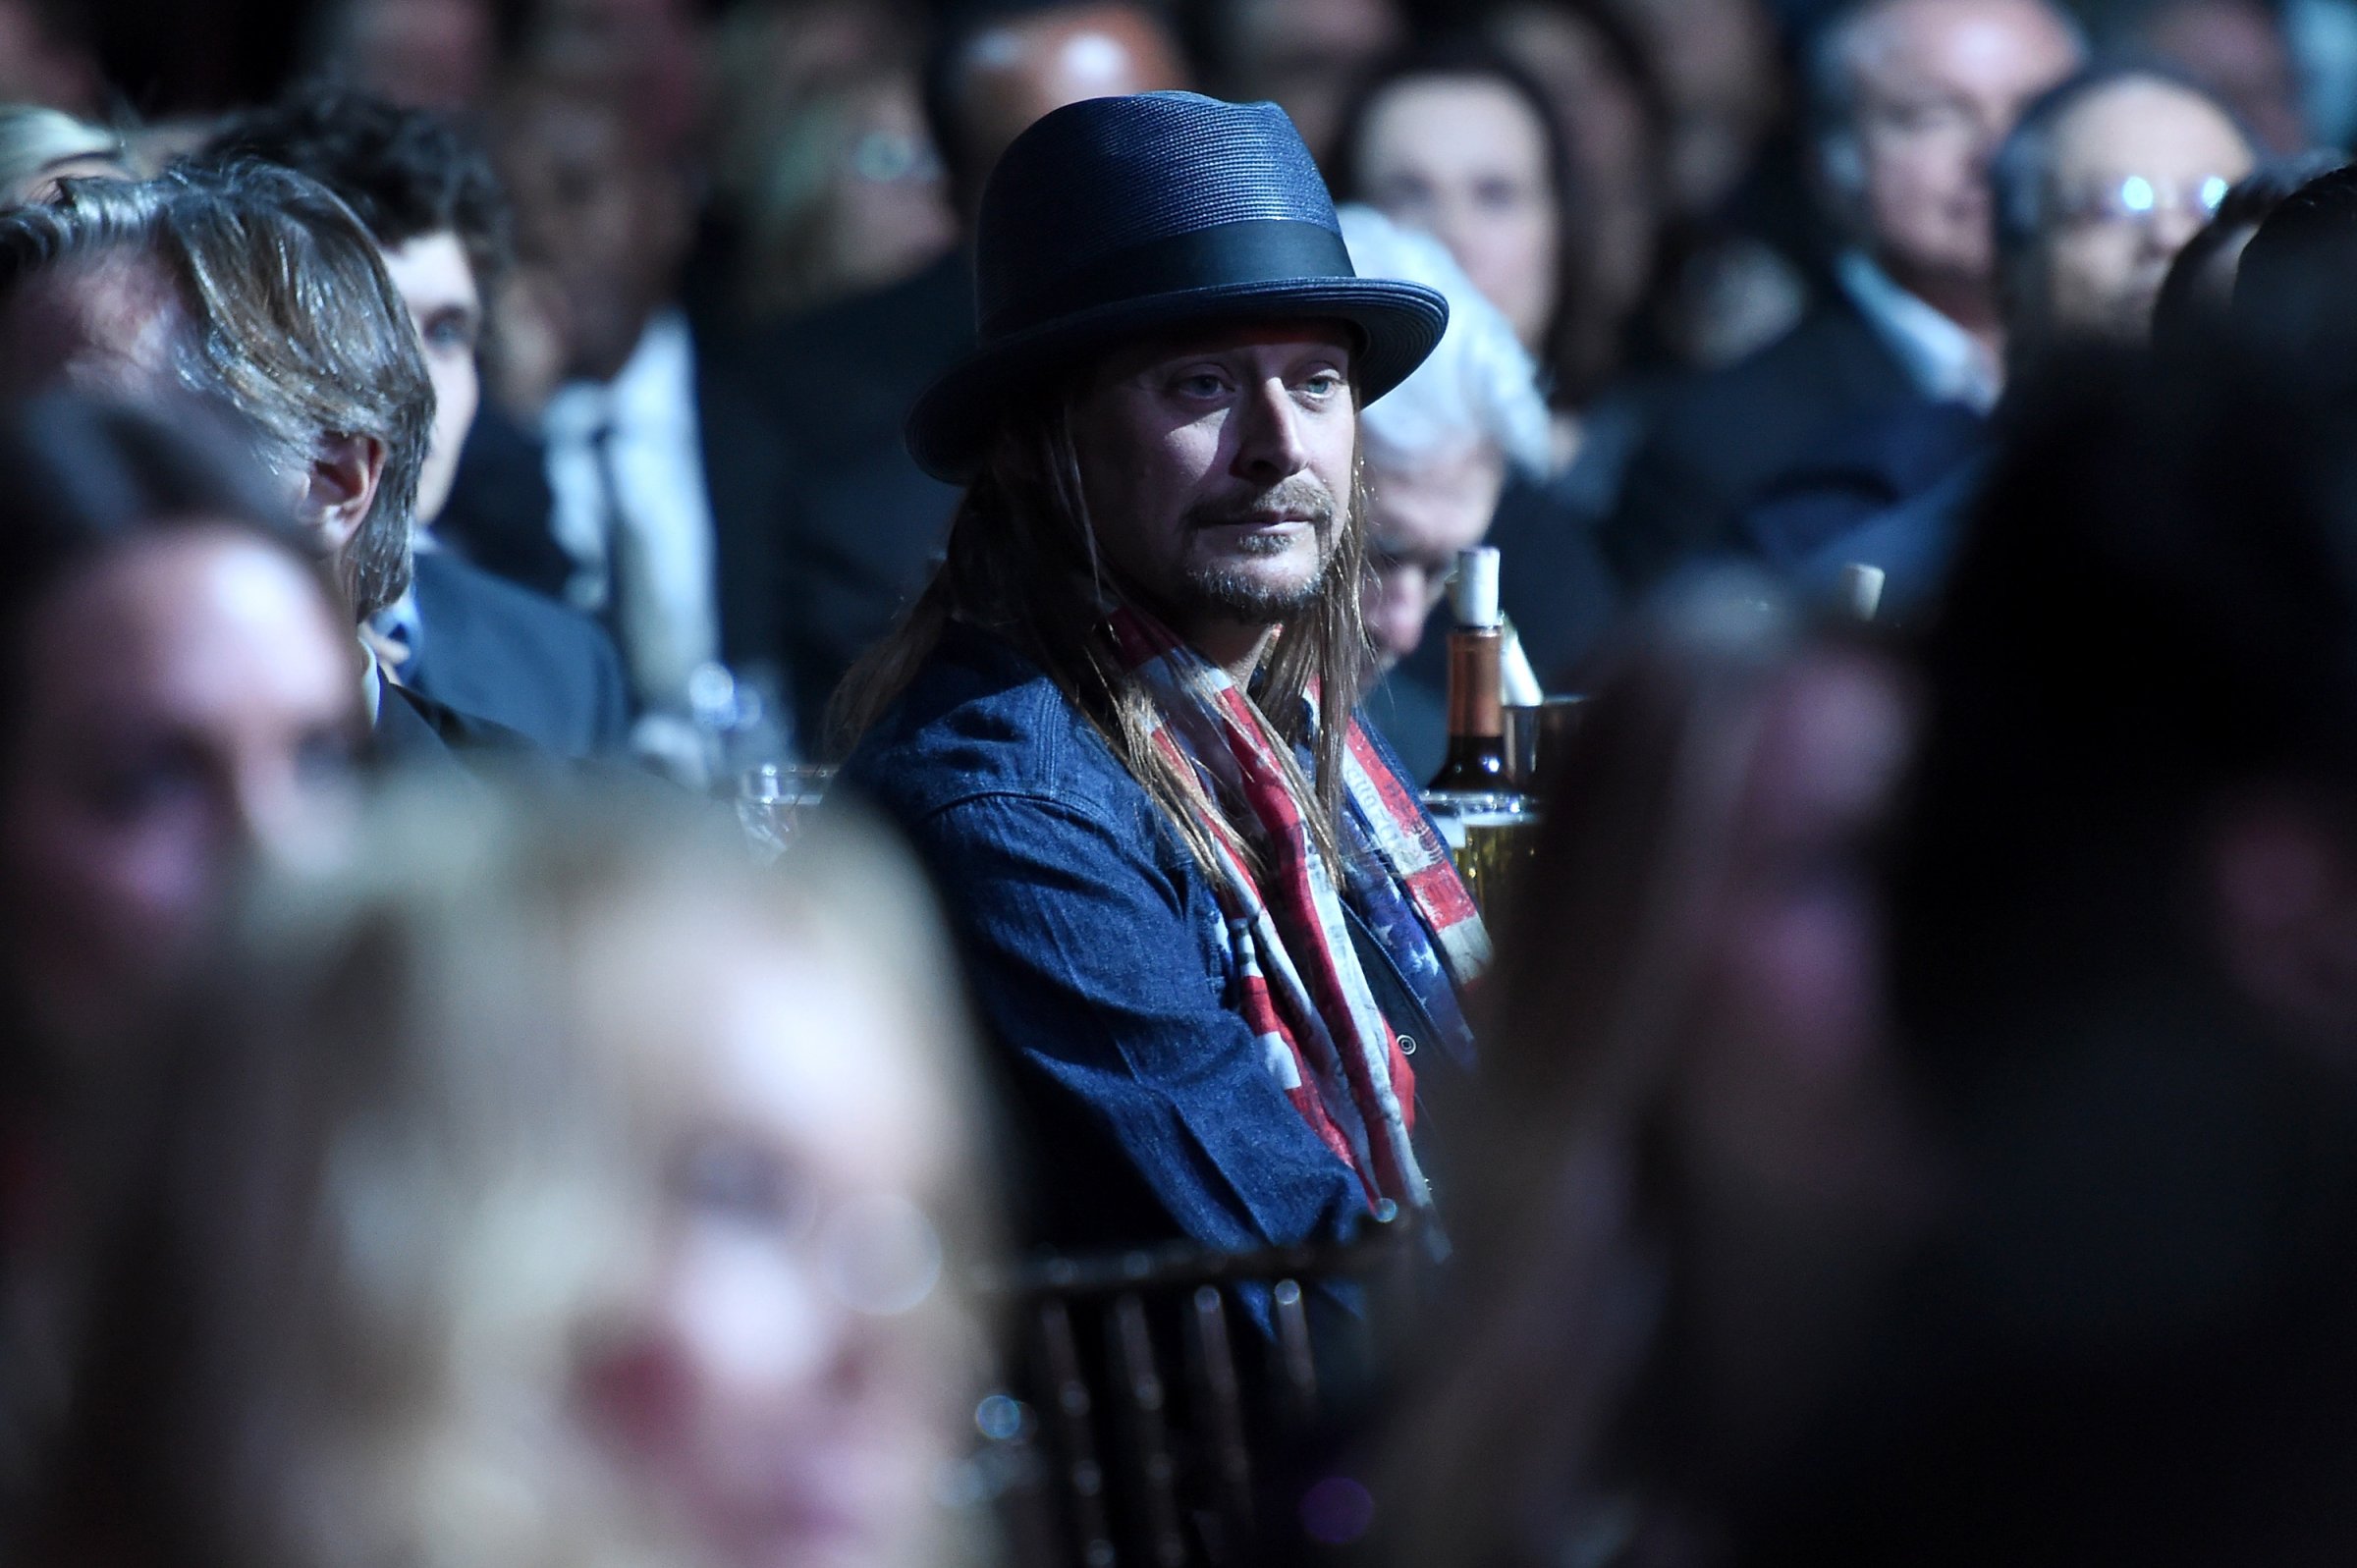 31st Annual Rock And Roll Hall Of Fame Induction Ceremony - Inside